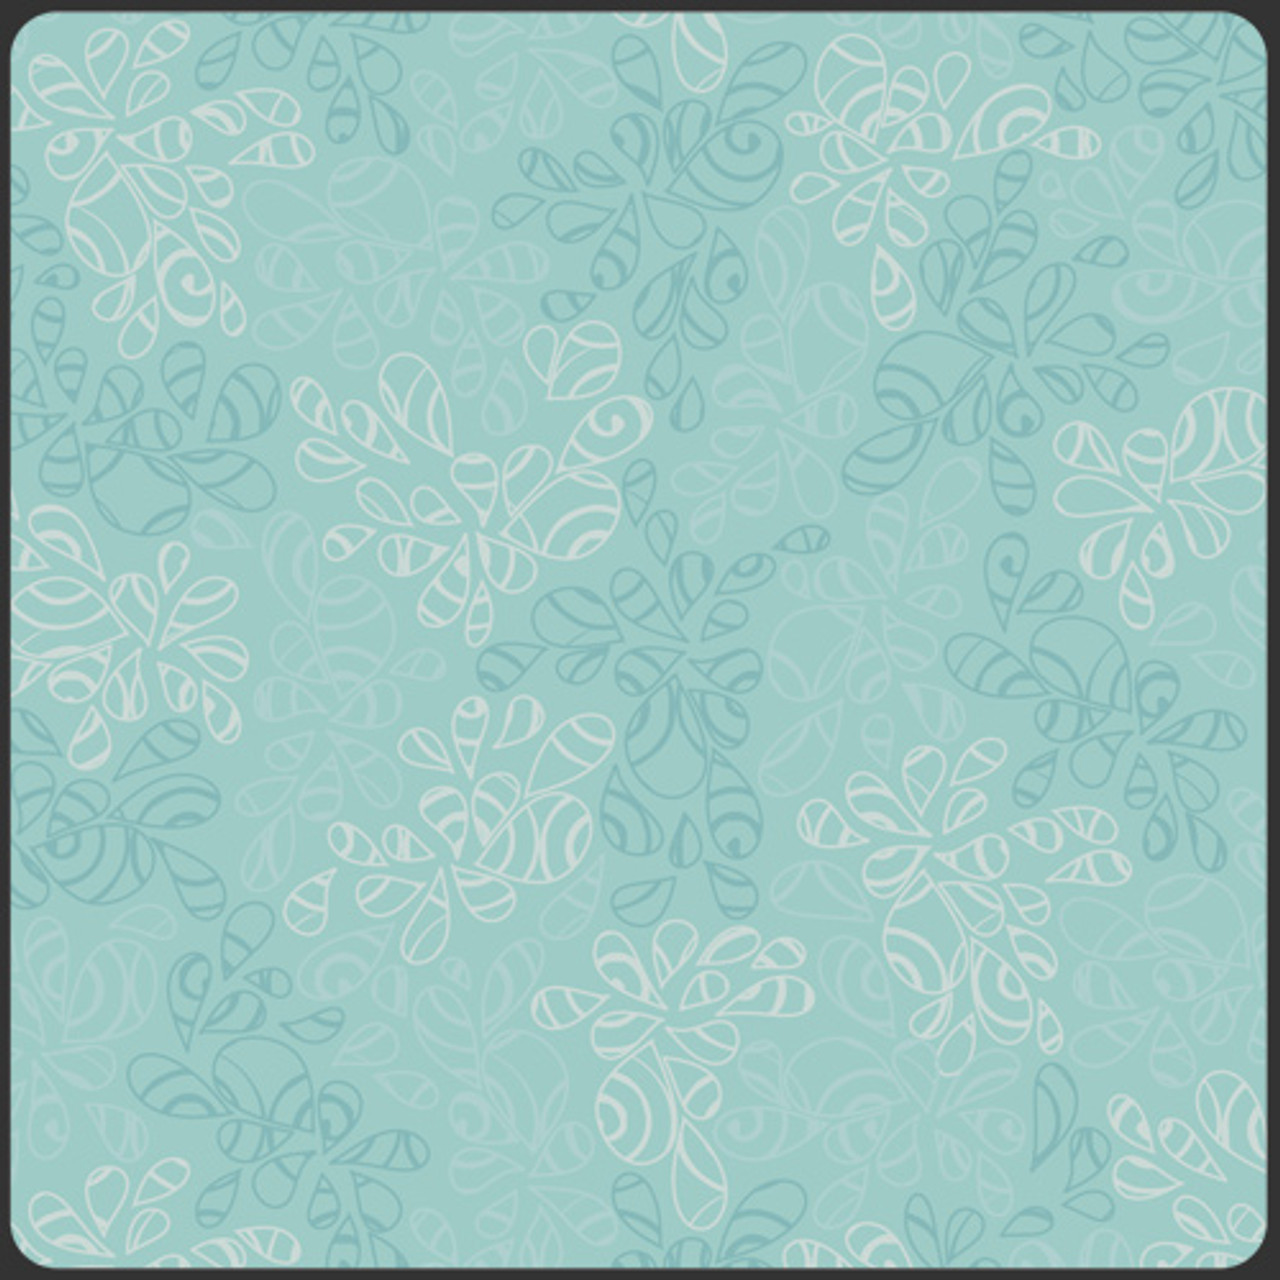 AGF Fabric Nature Blue Light NE-101, By-the-yard.